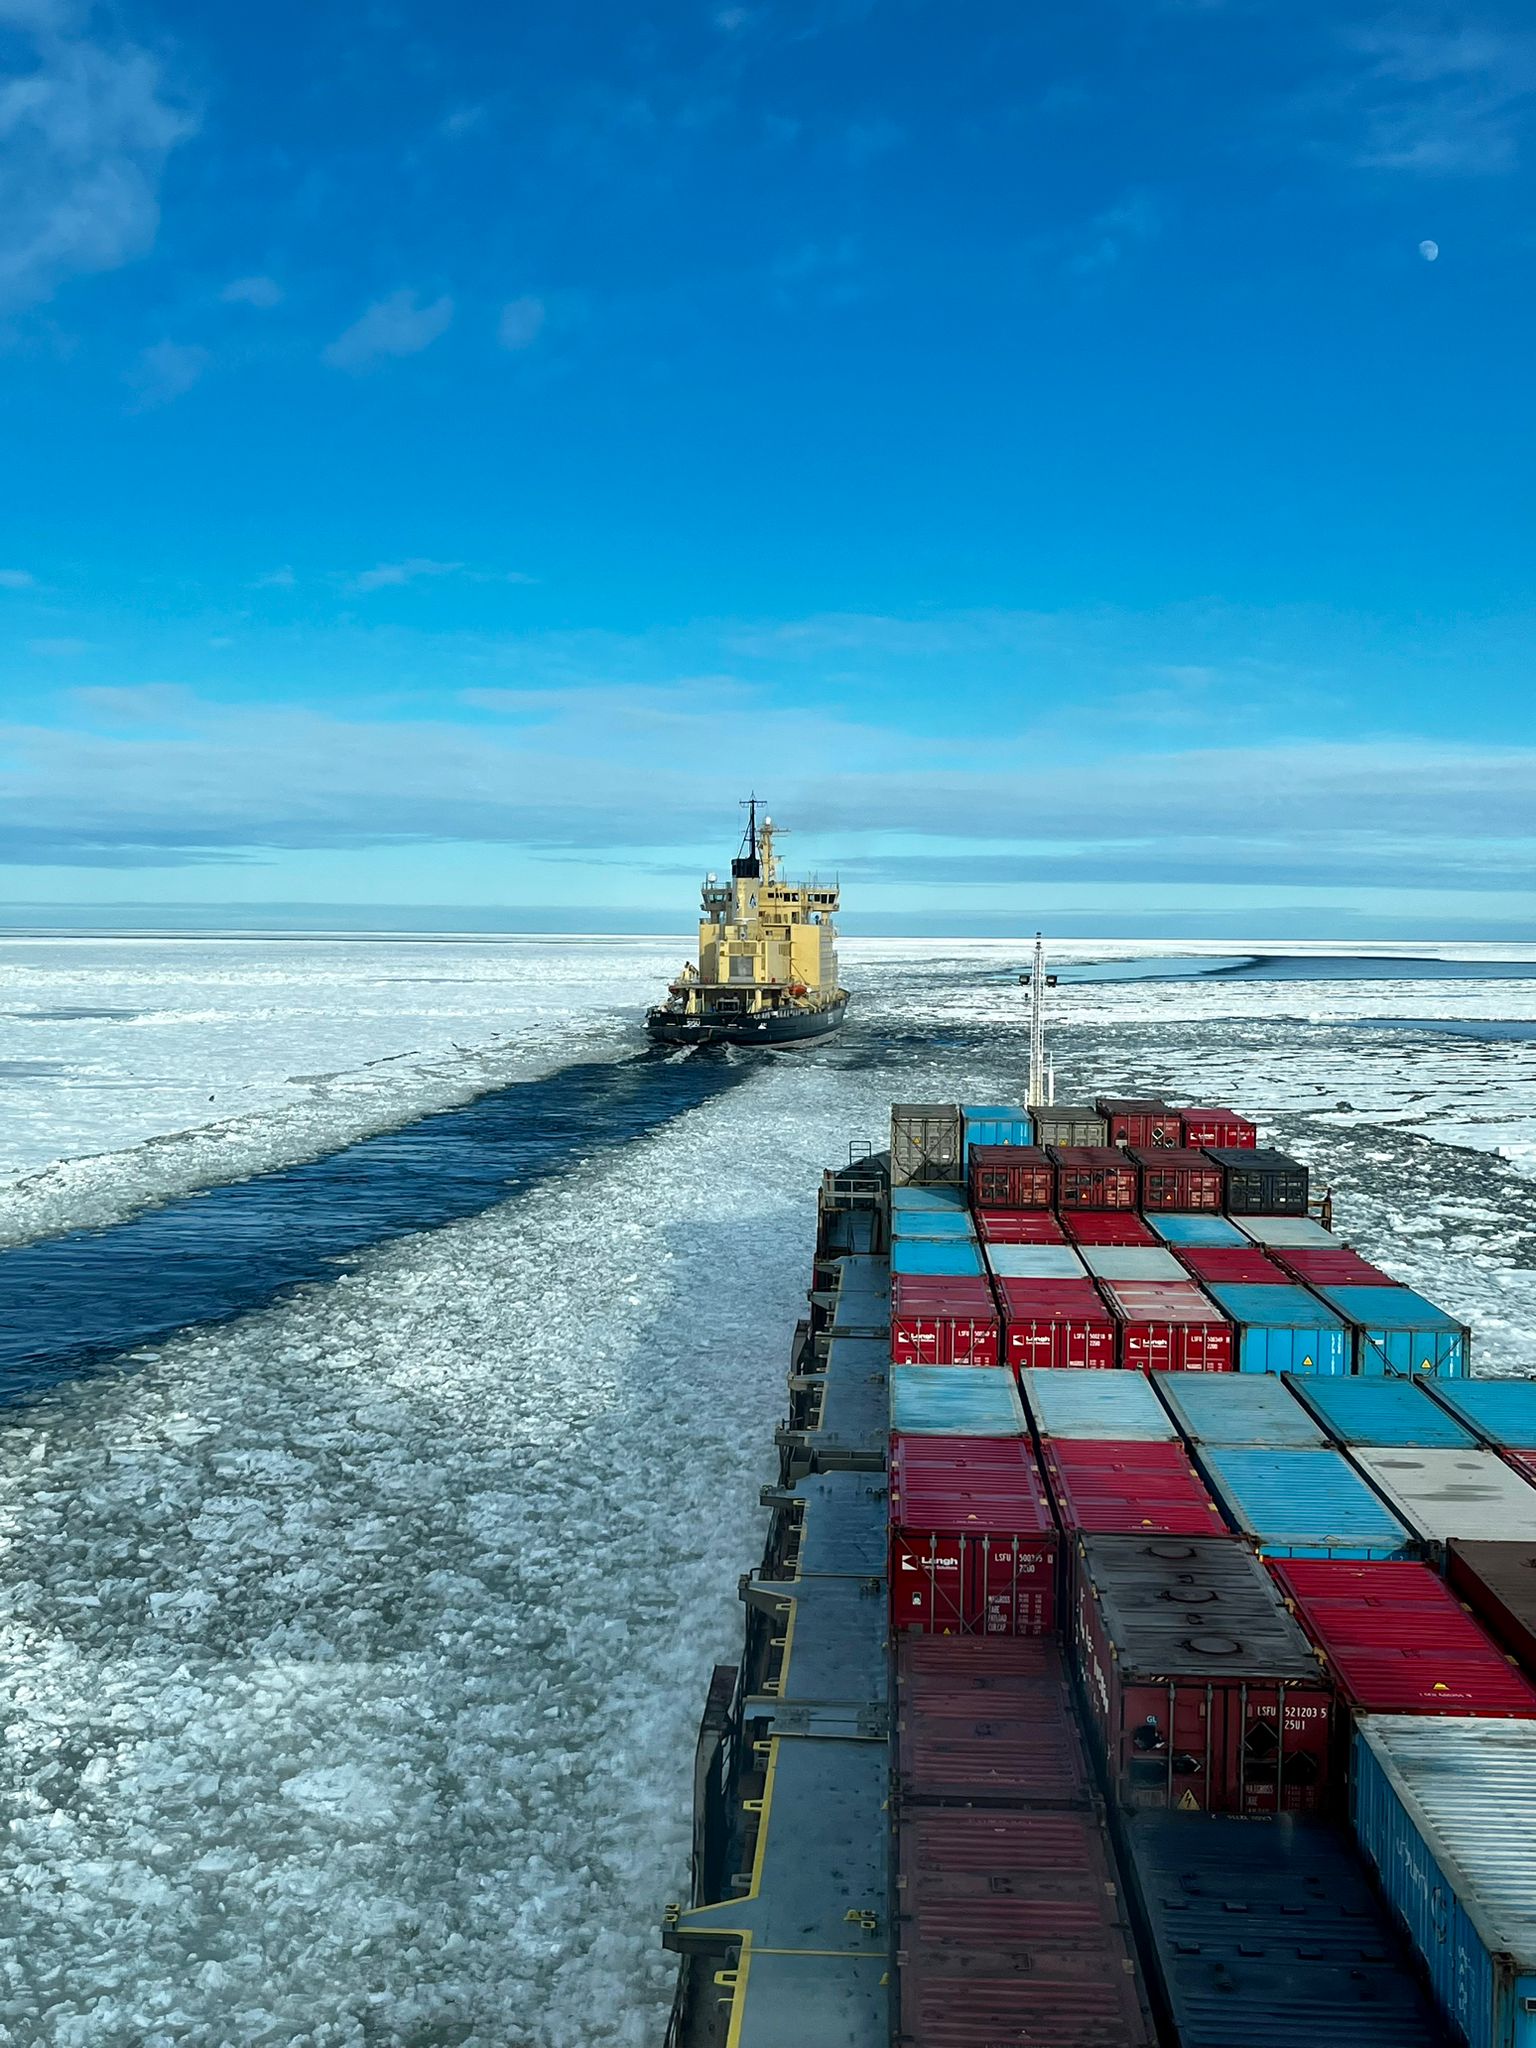 cargo ship traveling through ice in Gulf of Bothnia with other ship in view